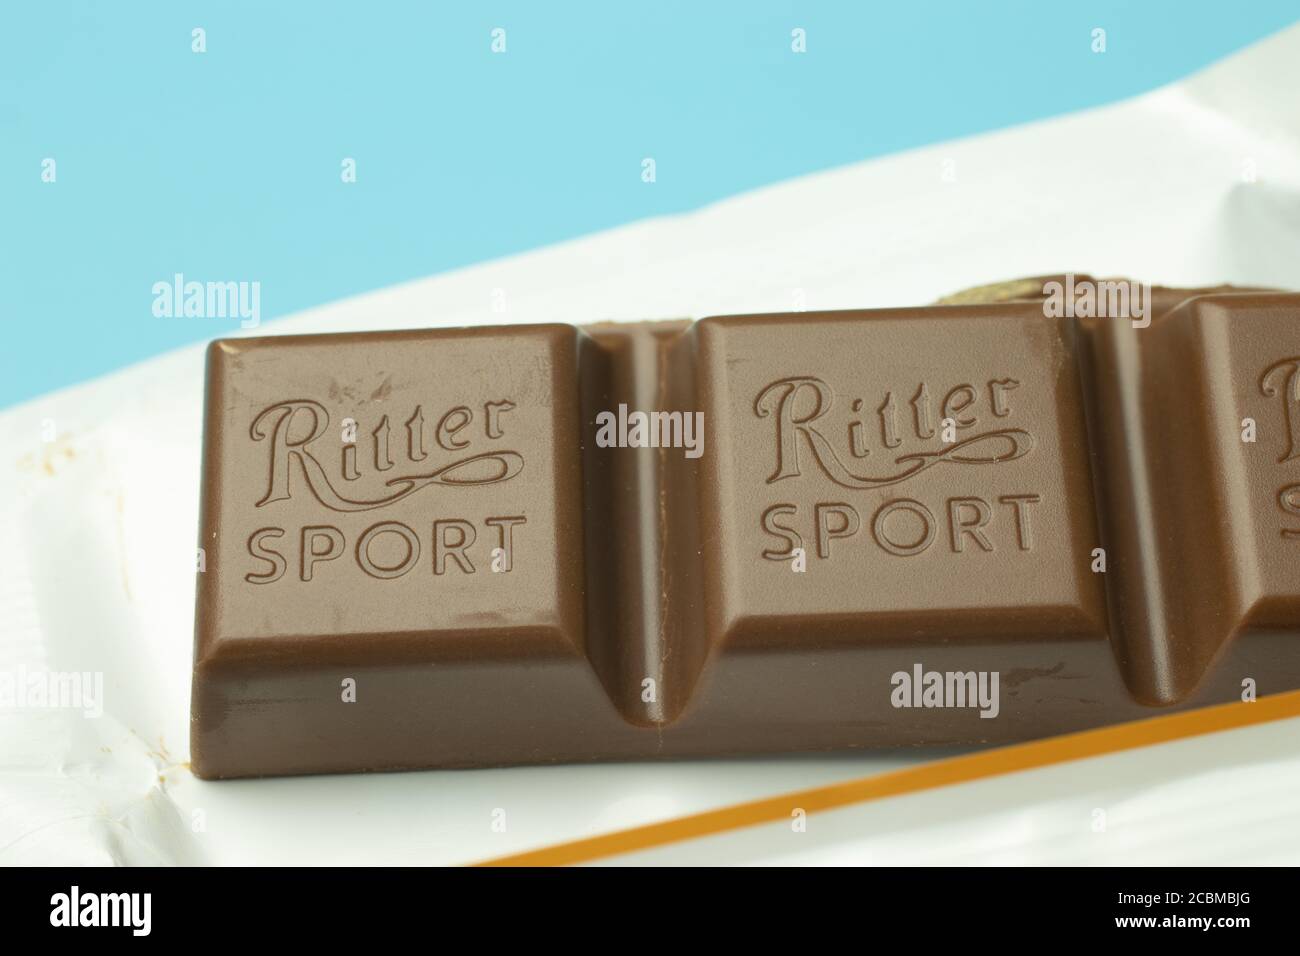 Moscow, Russia - 1 June 2020: Ritter Sport chocolate with logo close-up, Illustrative Editorial. Stock Photo